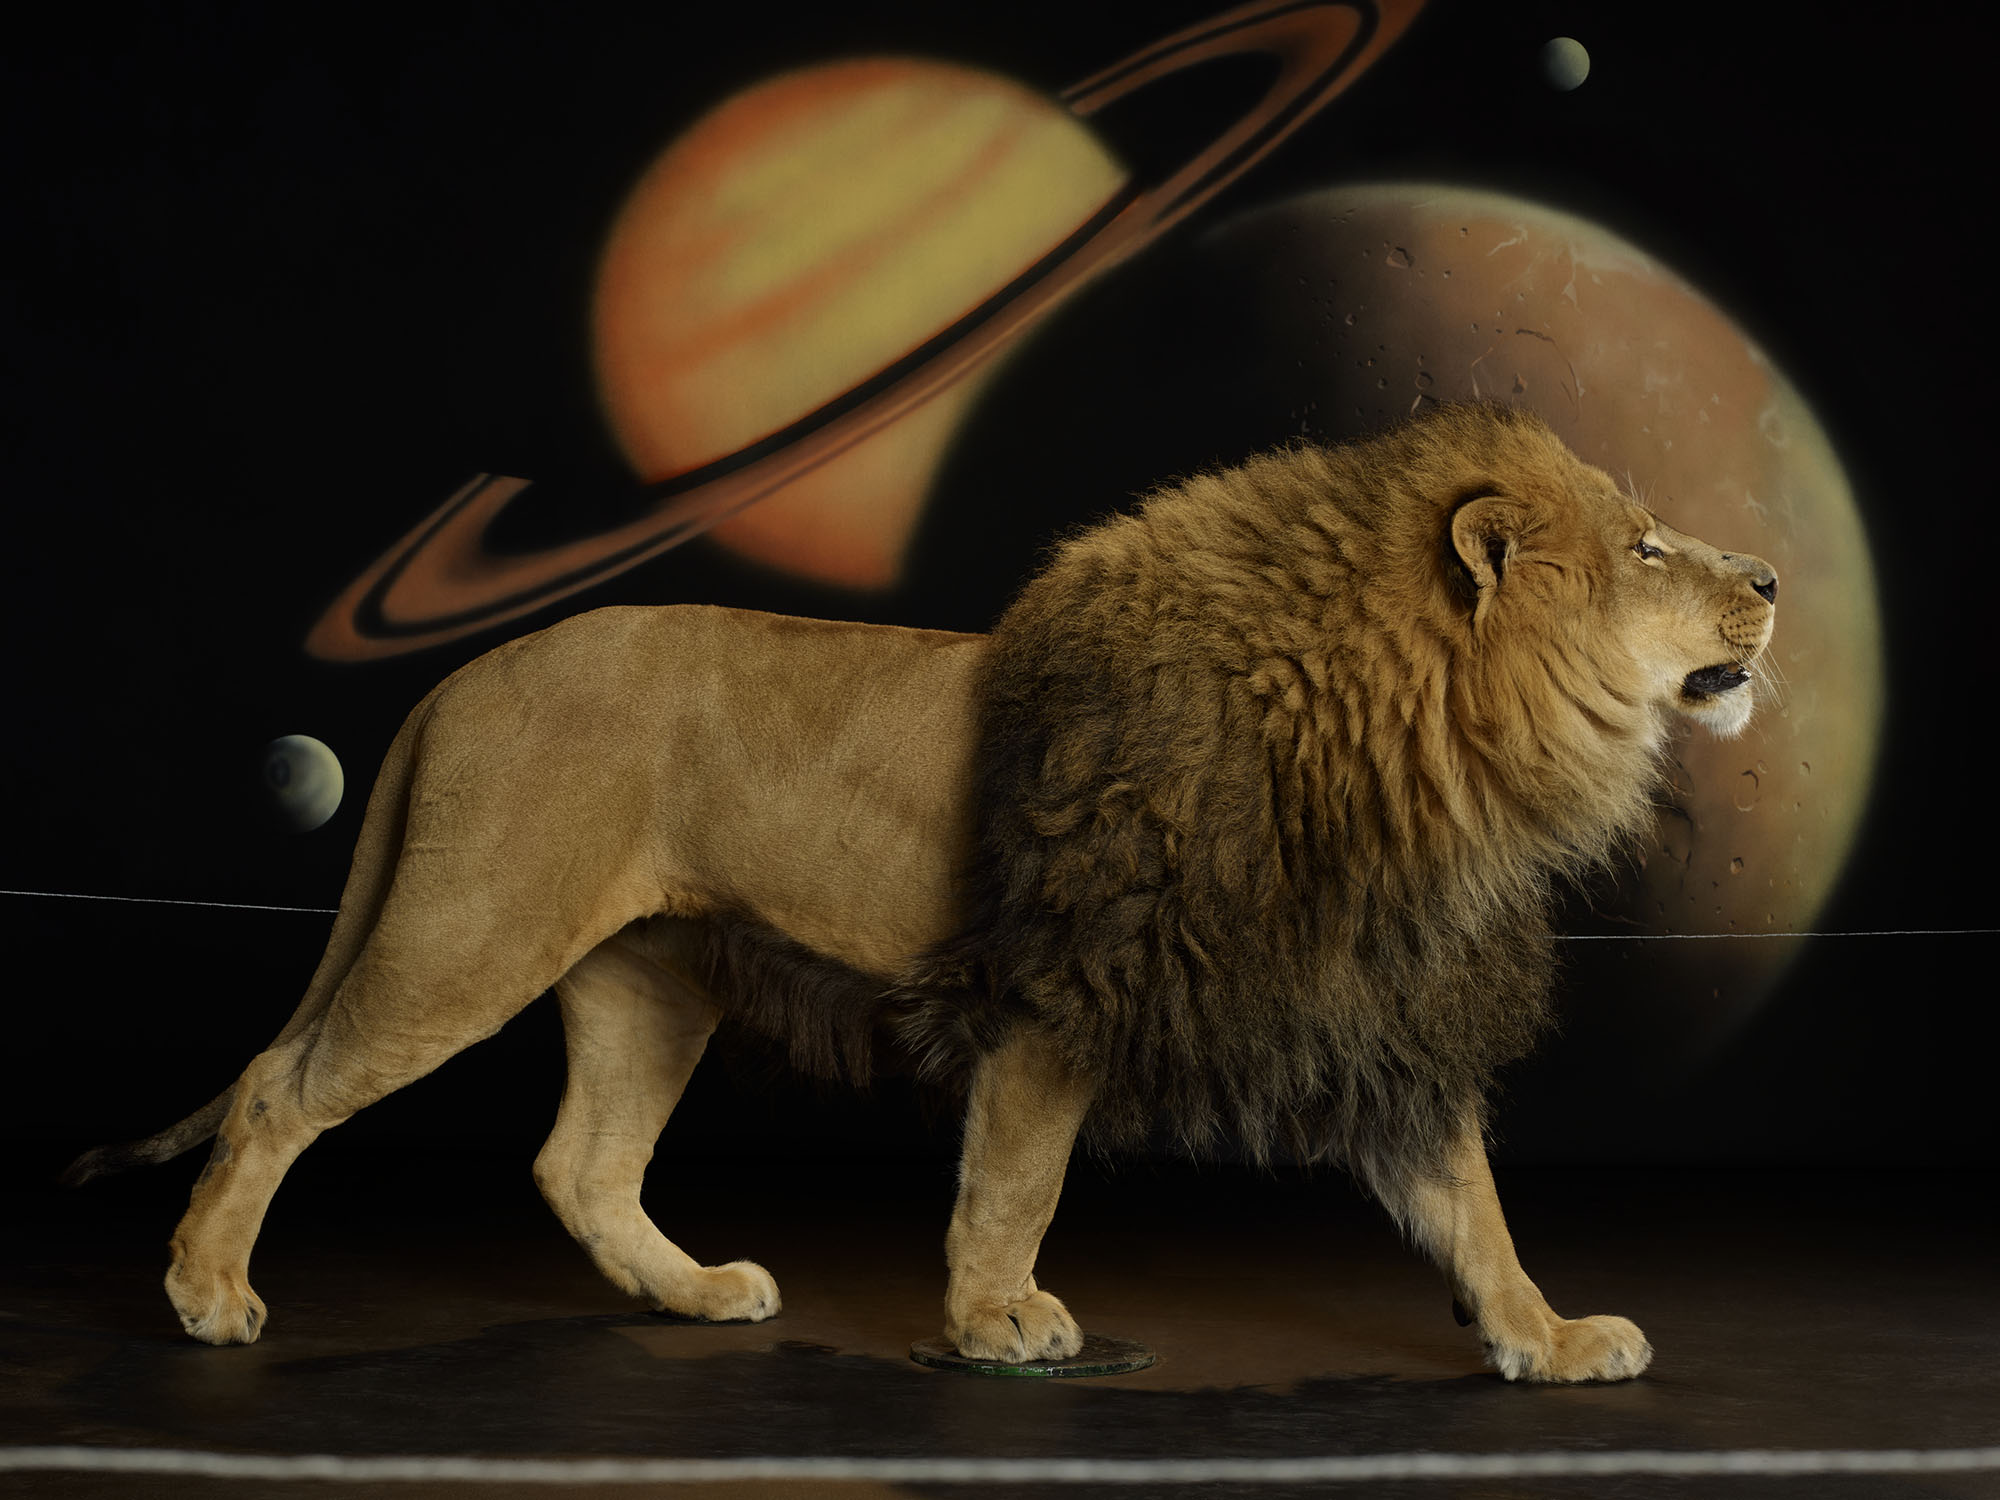 A lion posed in front of the solar system, by Awol Erizku